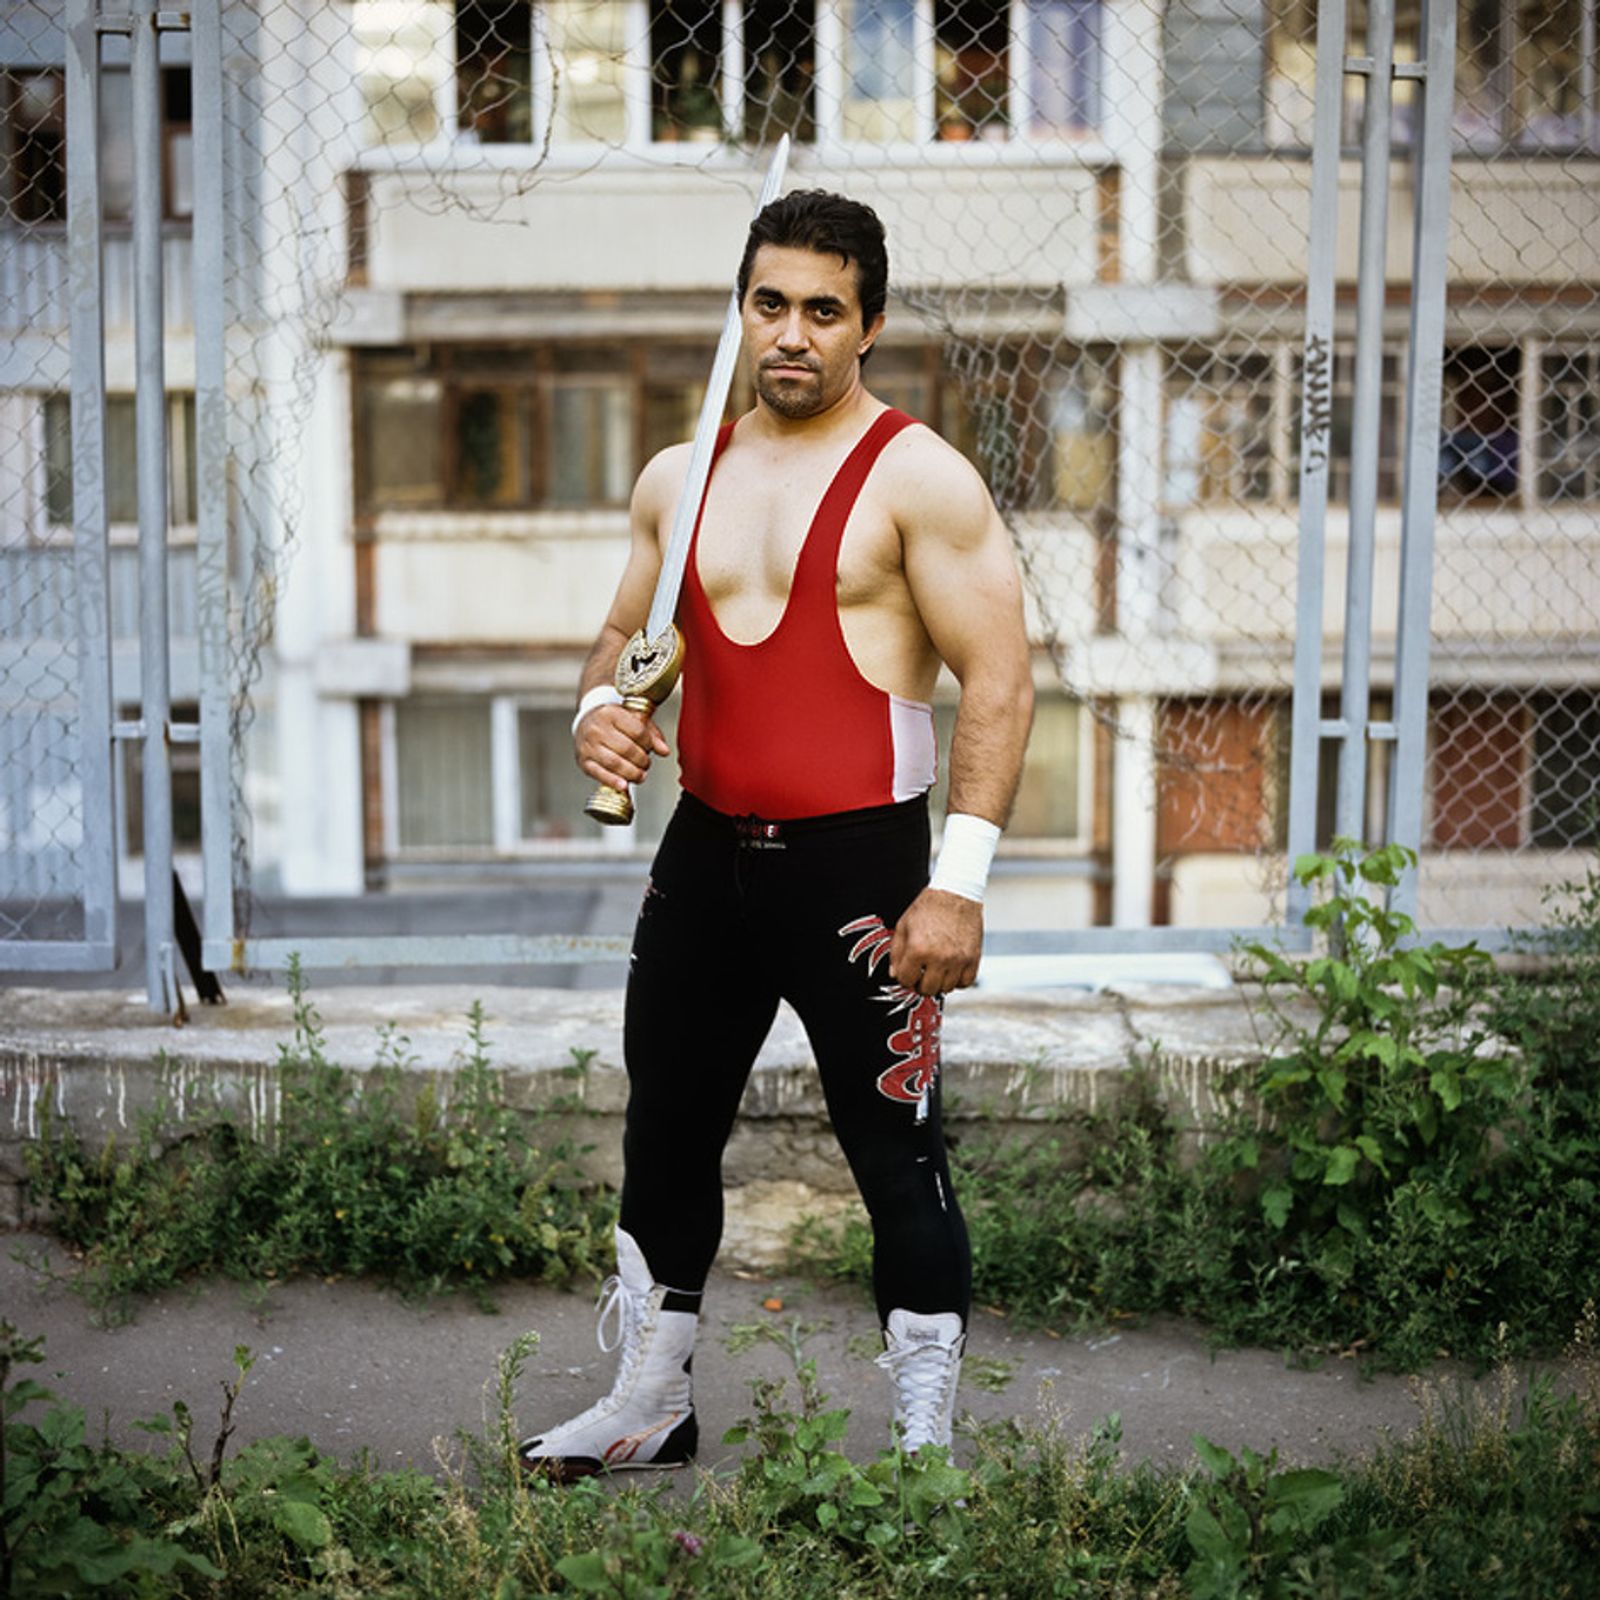 © Dmitry Lookianov - Image from the The Russian wrestlers photography project